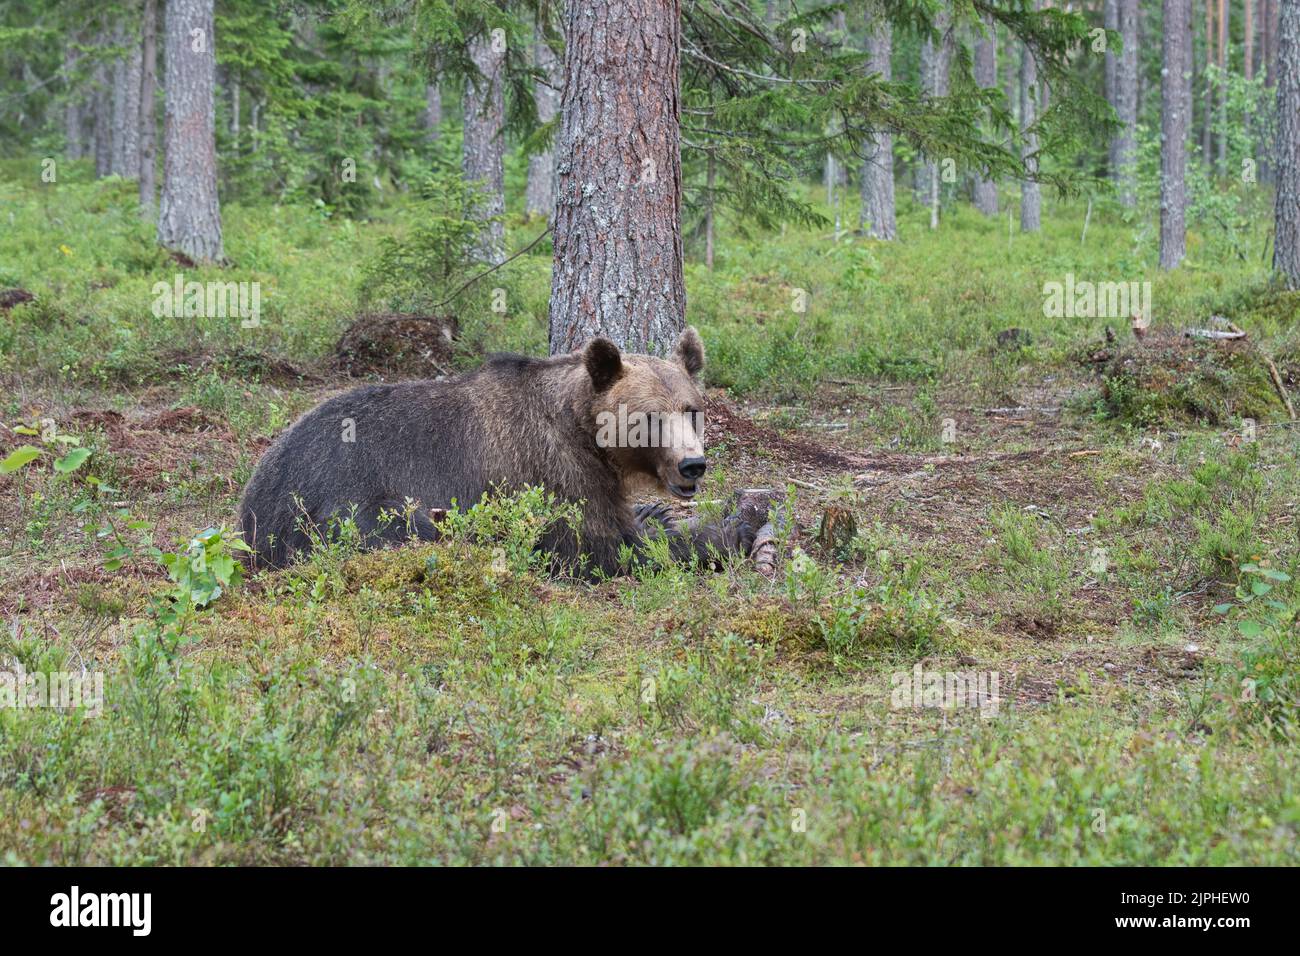 Brown bear (Ursus arctos) in the boreal forest or Taiga of Finland Stock Photo